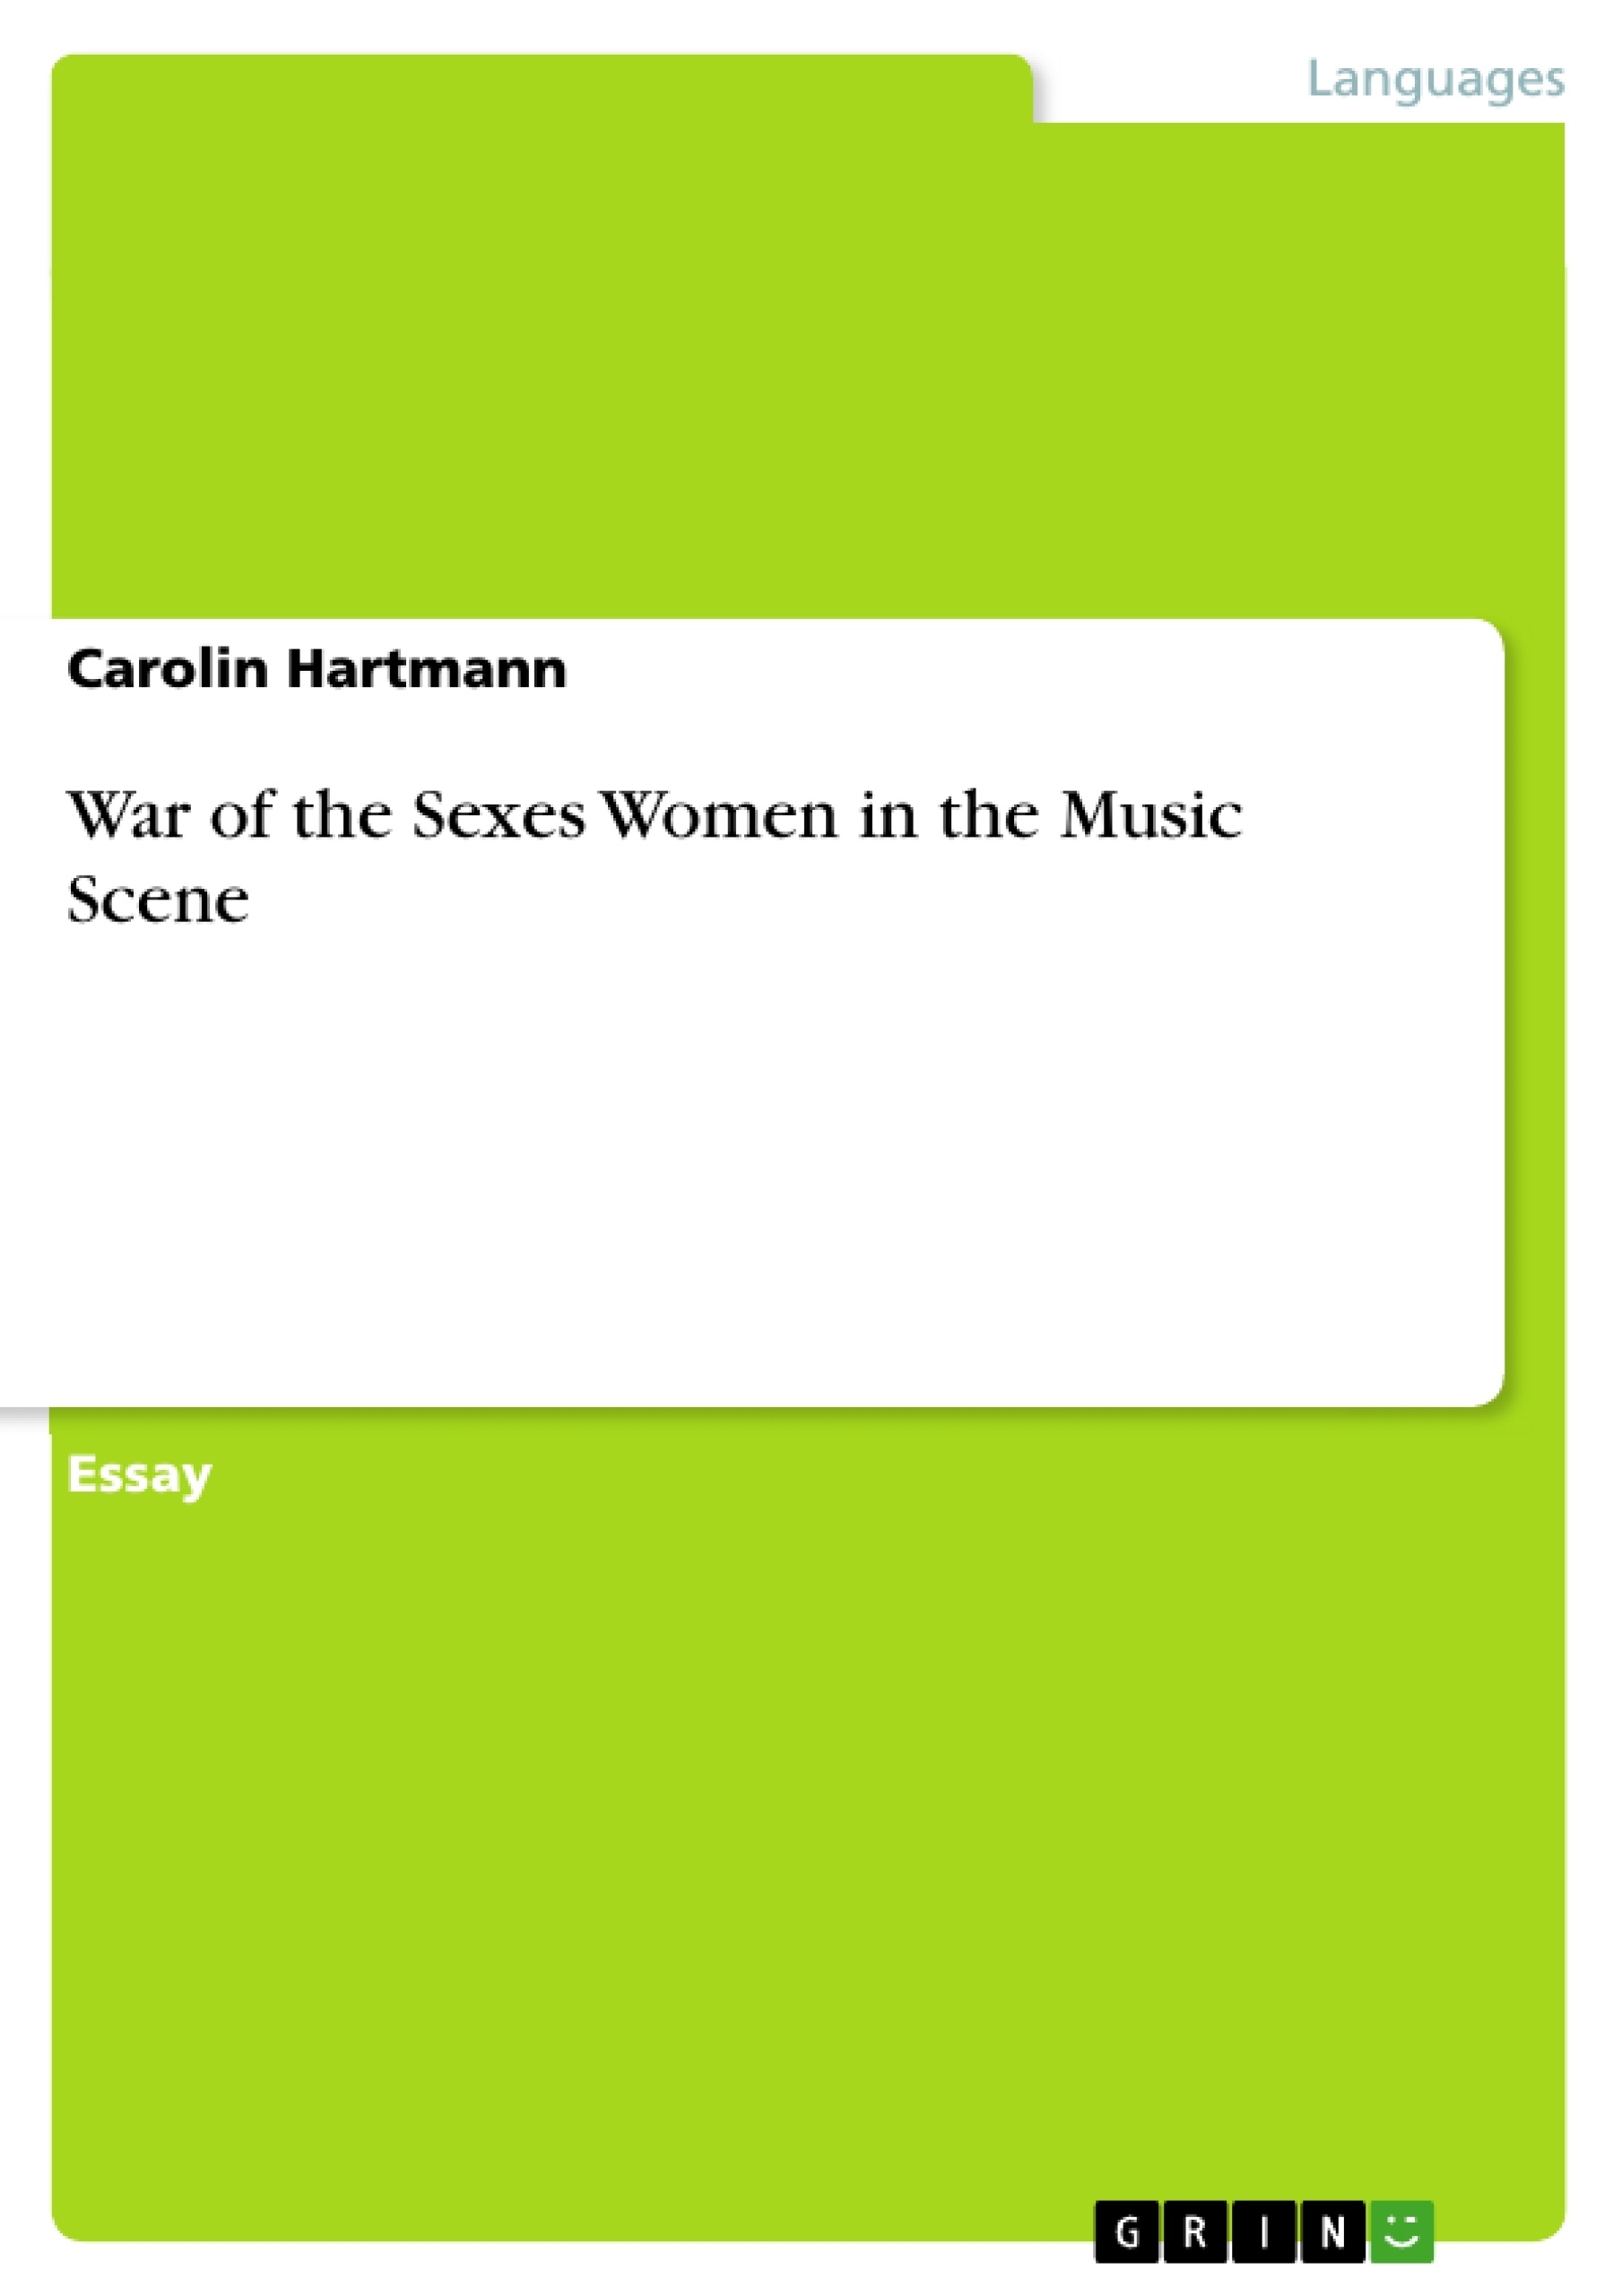 Título: War of the Sexes Women in the Music Scene